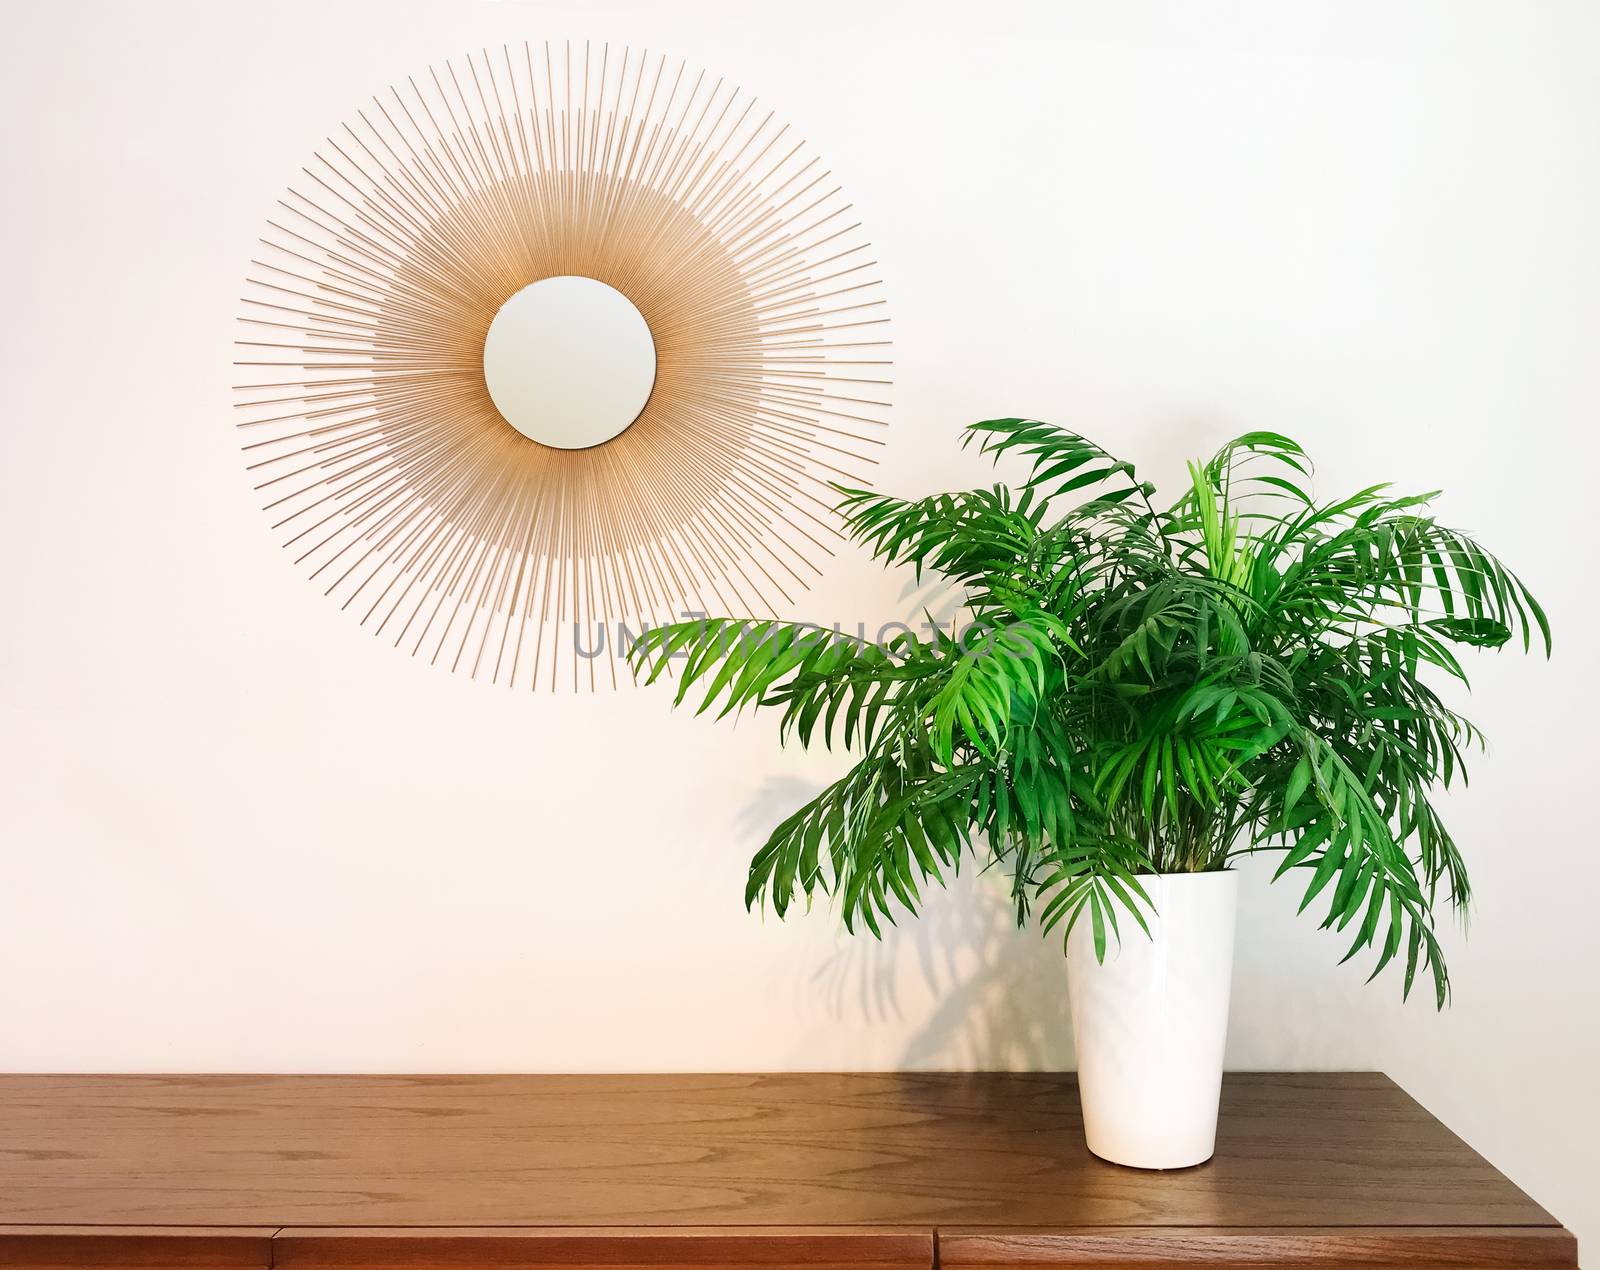 Decorative round mirror and parlor palm plant on a dresser. Modern home decor.